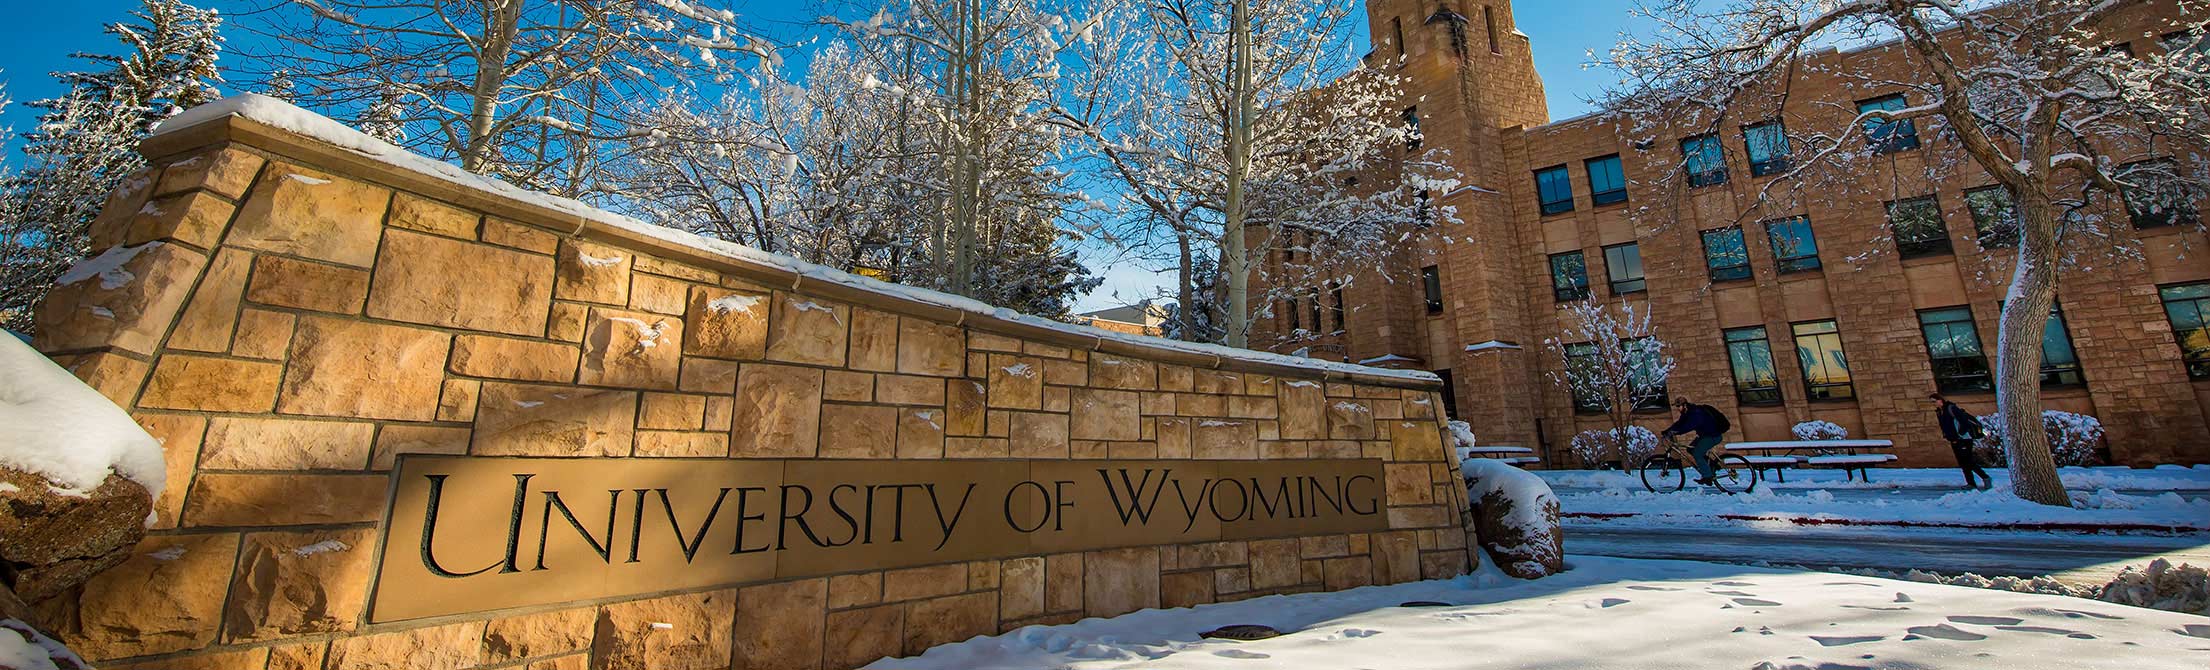 University of Wyoming stonework sign with Wyoming Union in the background